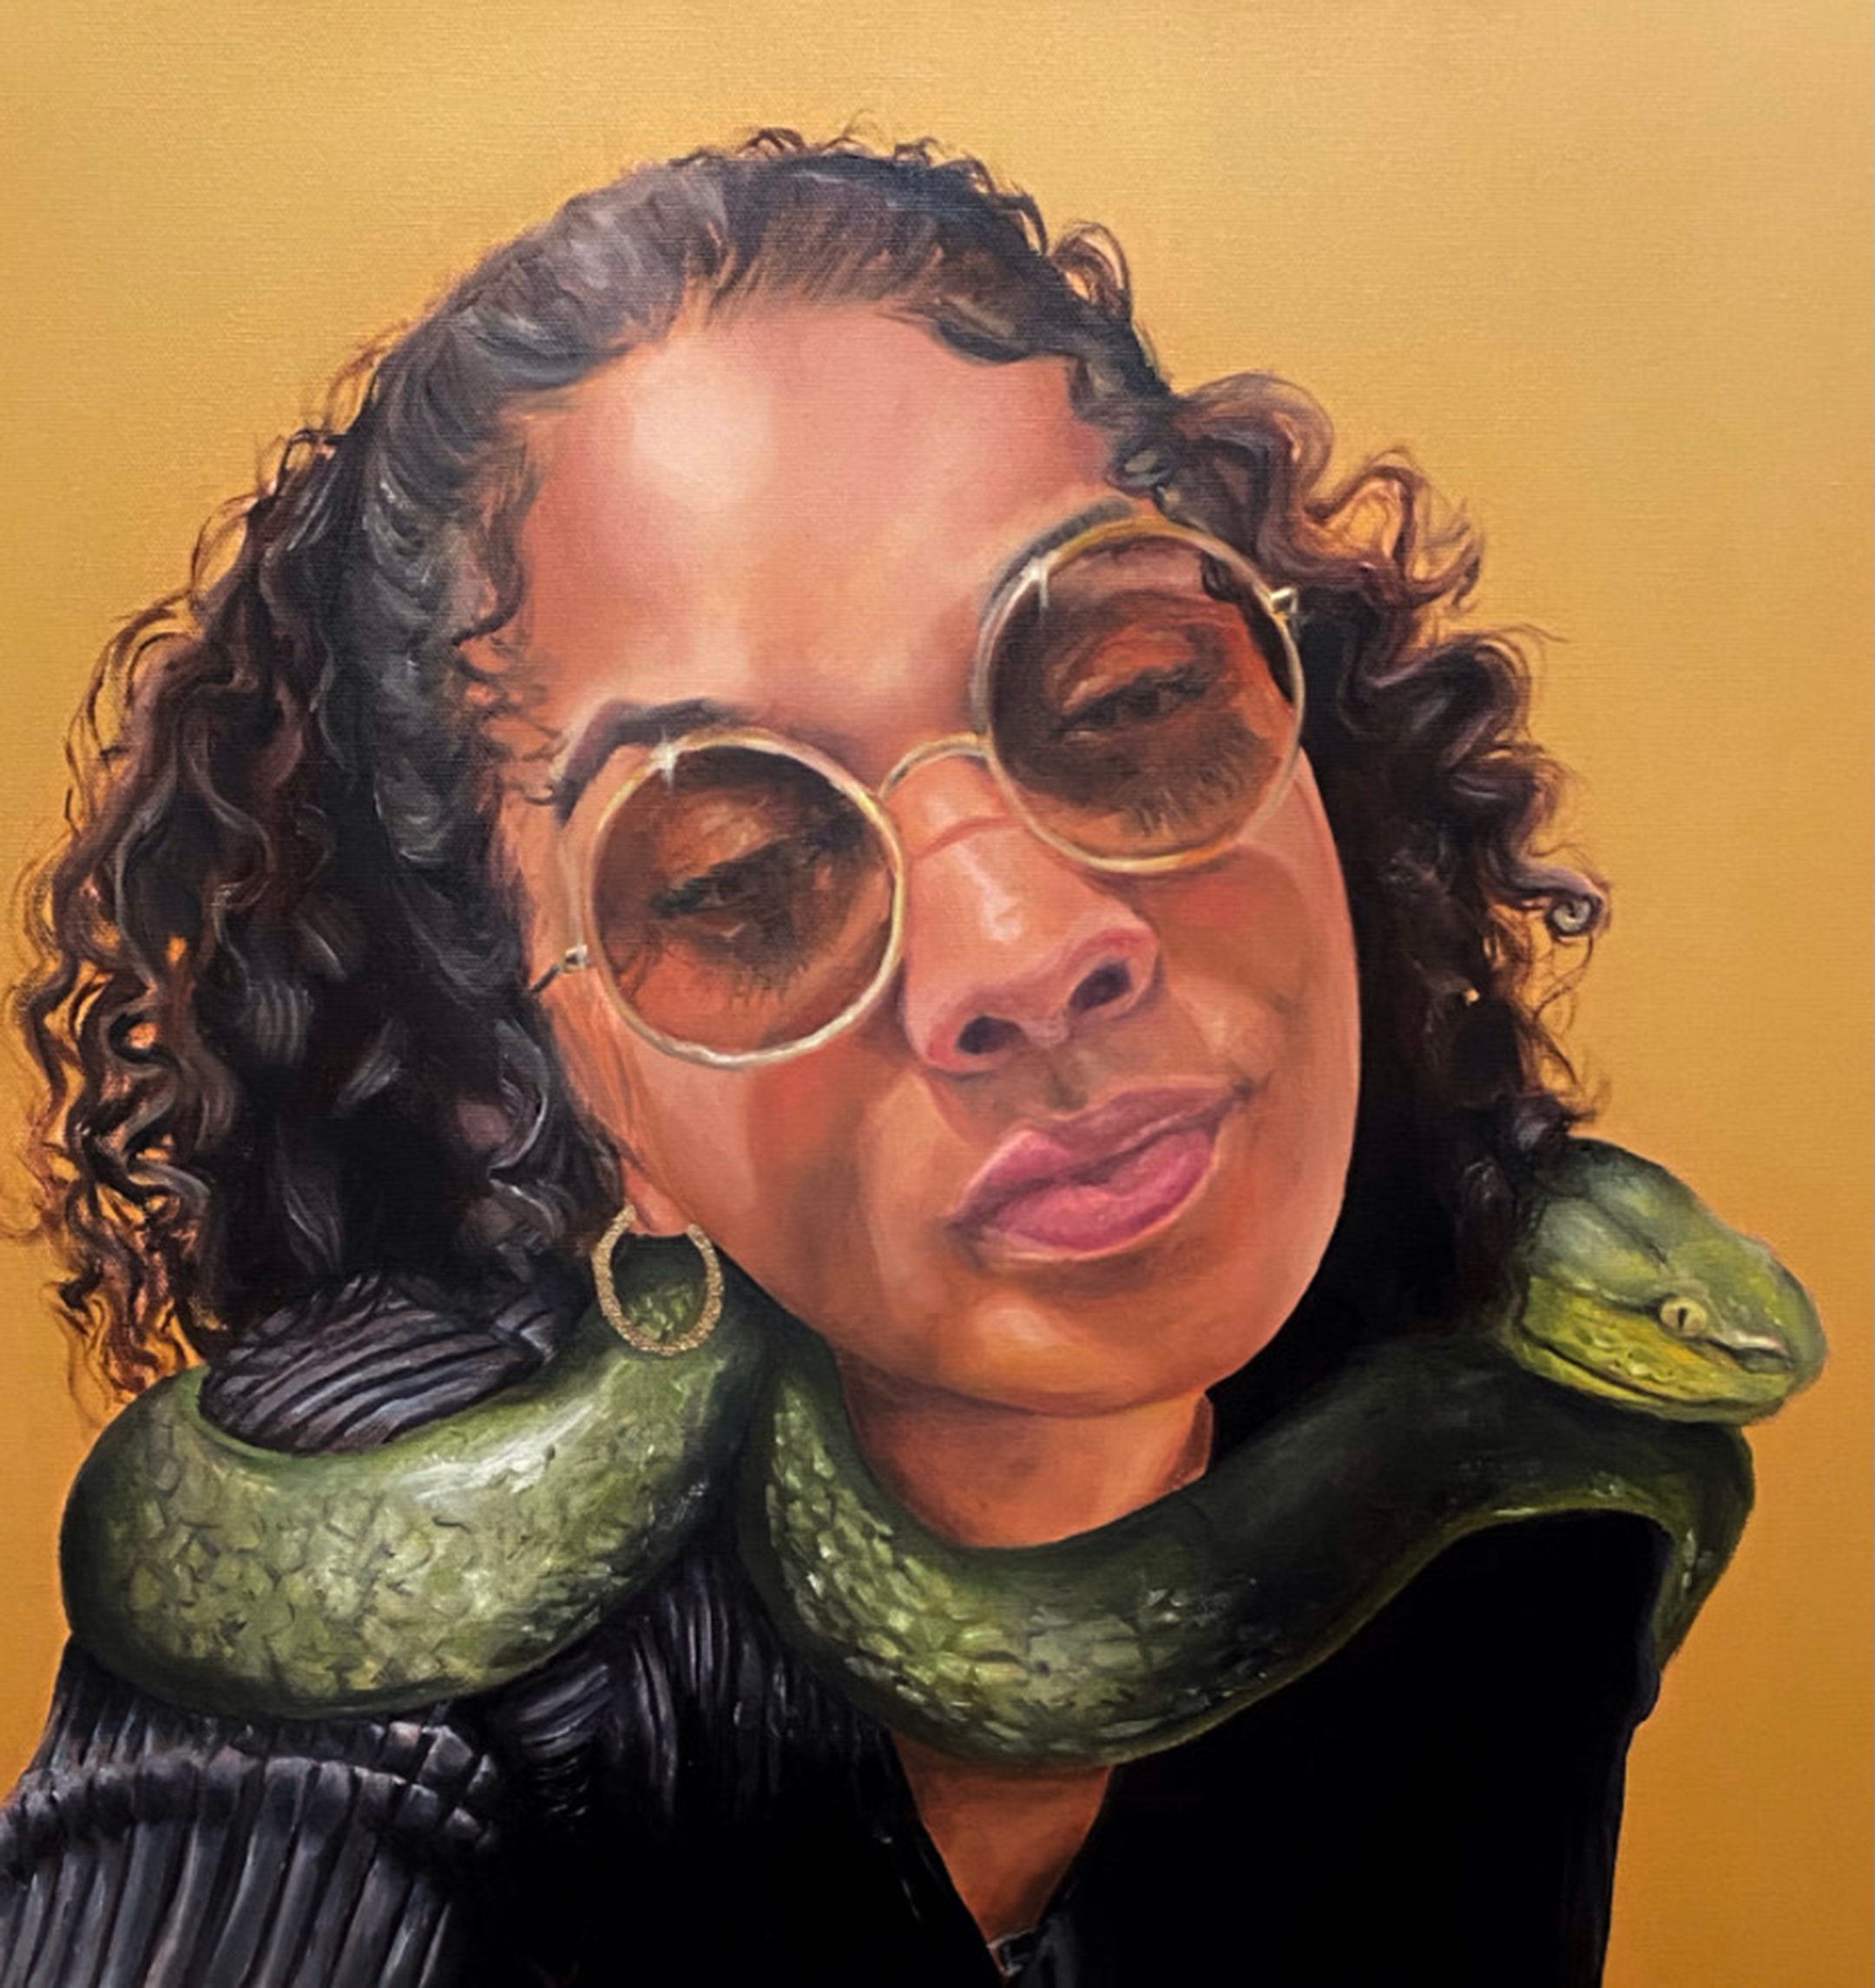 Portrait of a young black woman in sunglasses and with a green snake around her shoulders against a yellow background